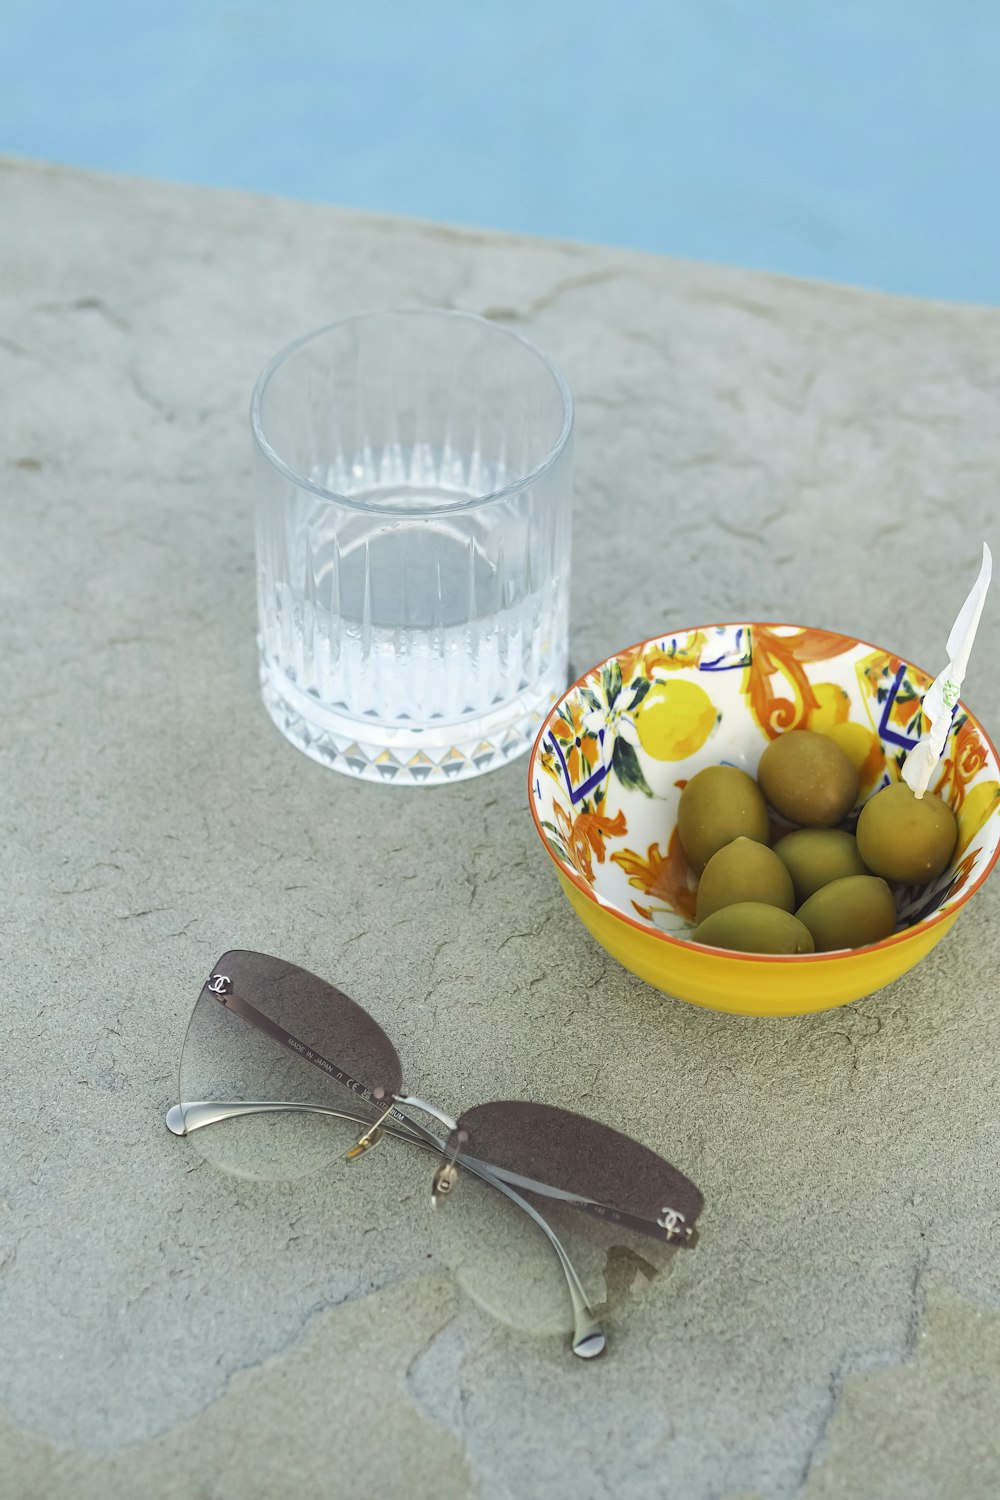 a bowl of olives next to a pair of glasses